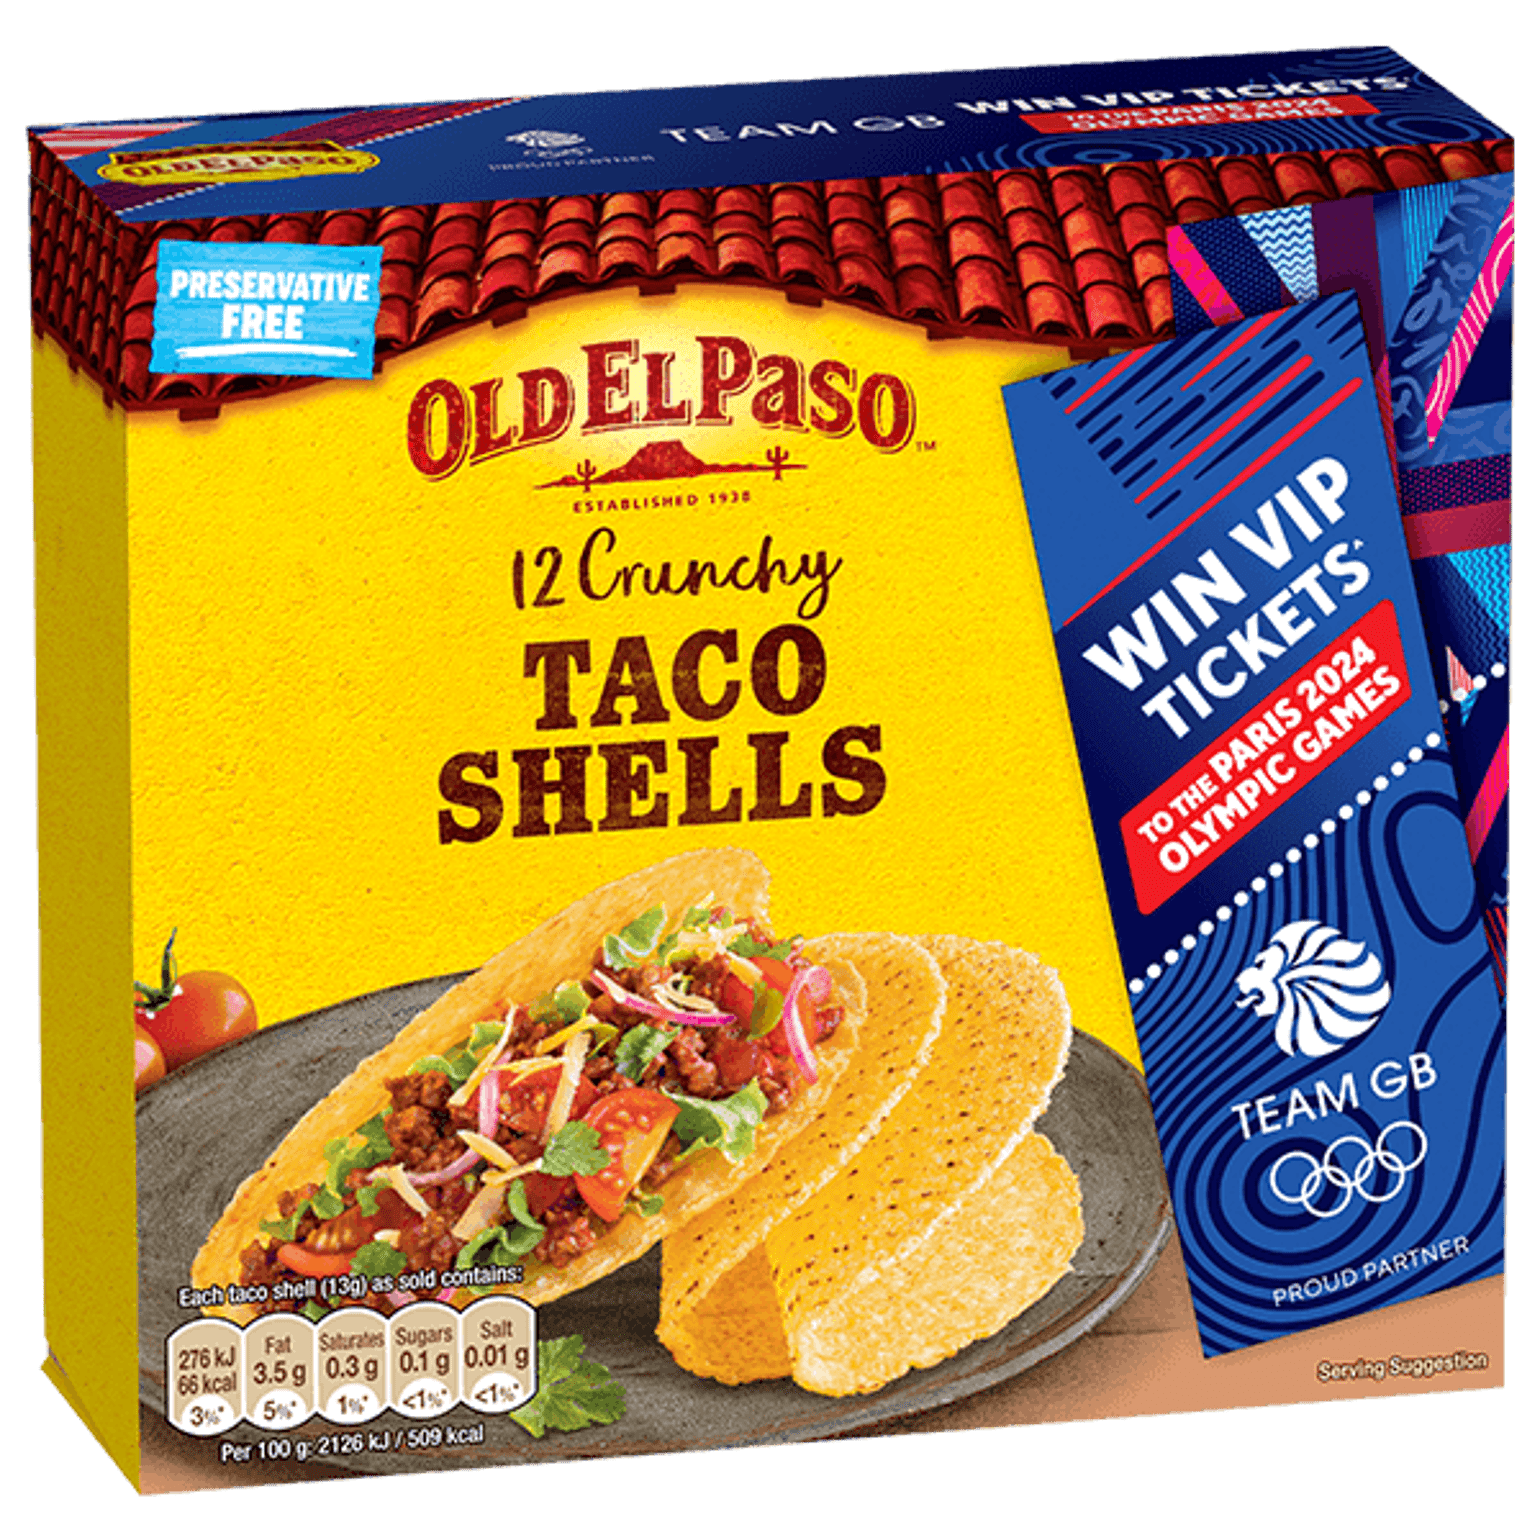 pack of Old El Paso's crunchy taco shells promoting paris olympic competition (156g)